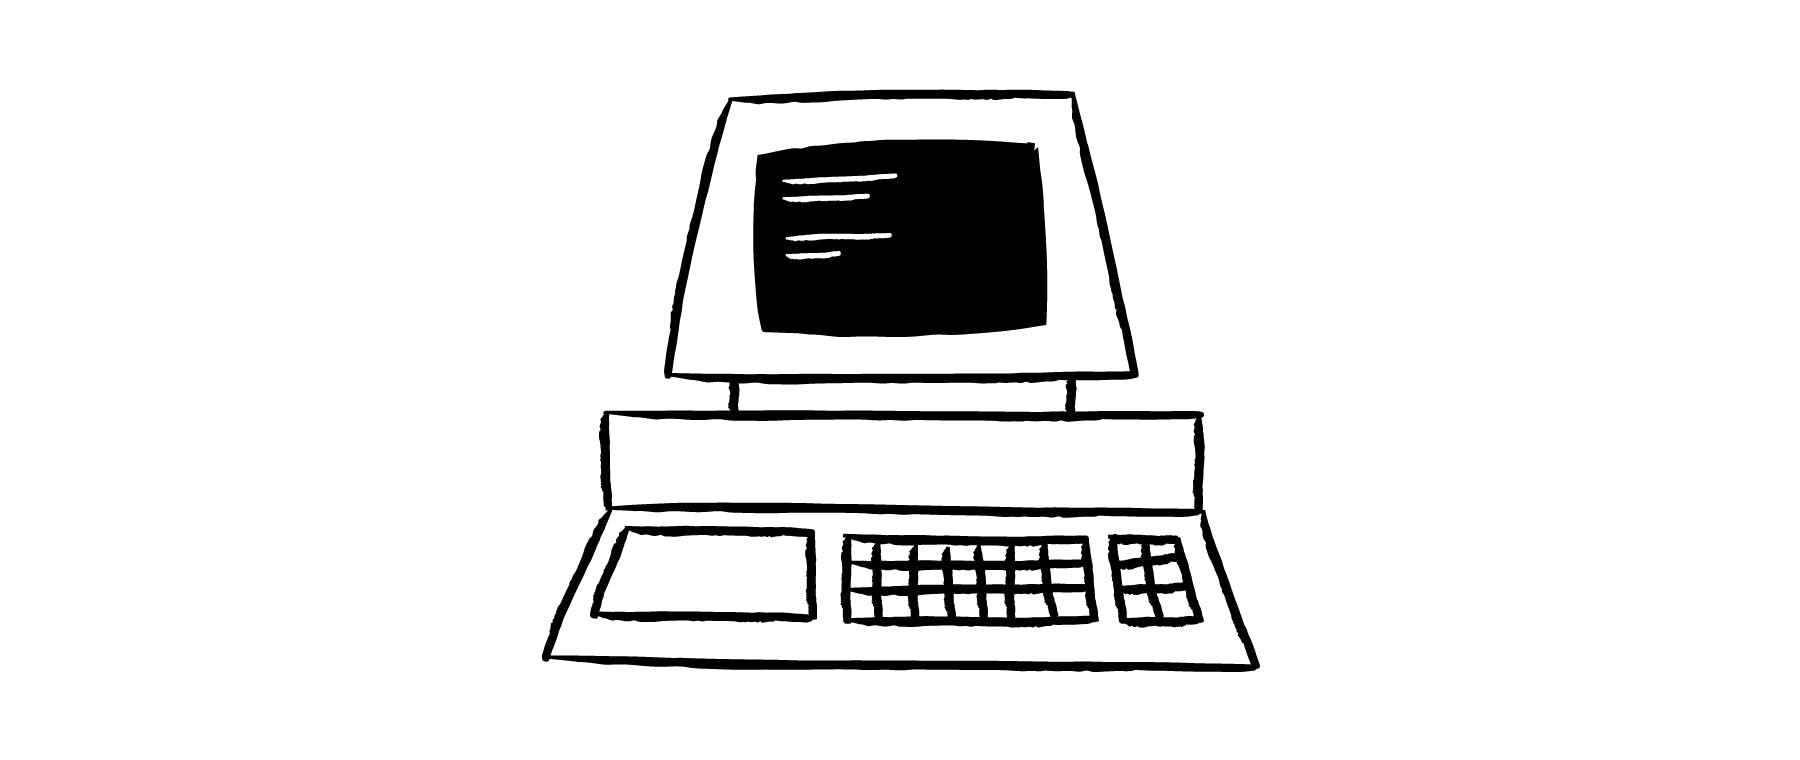 Illustration of an early computer